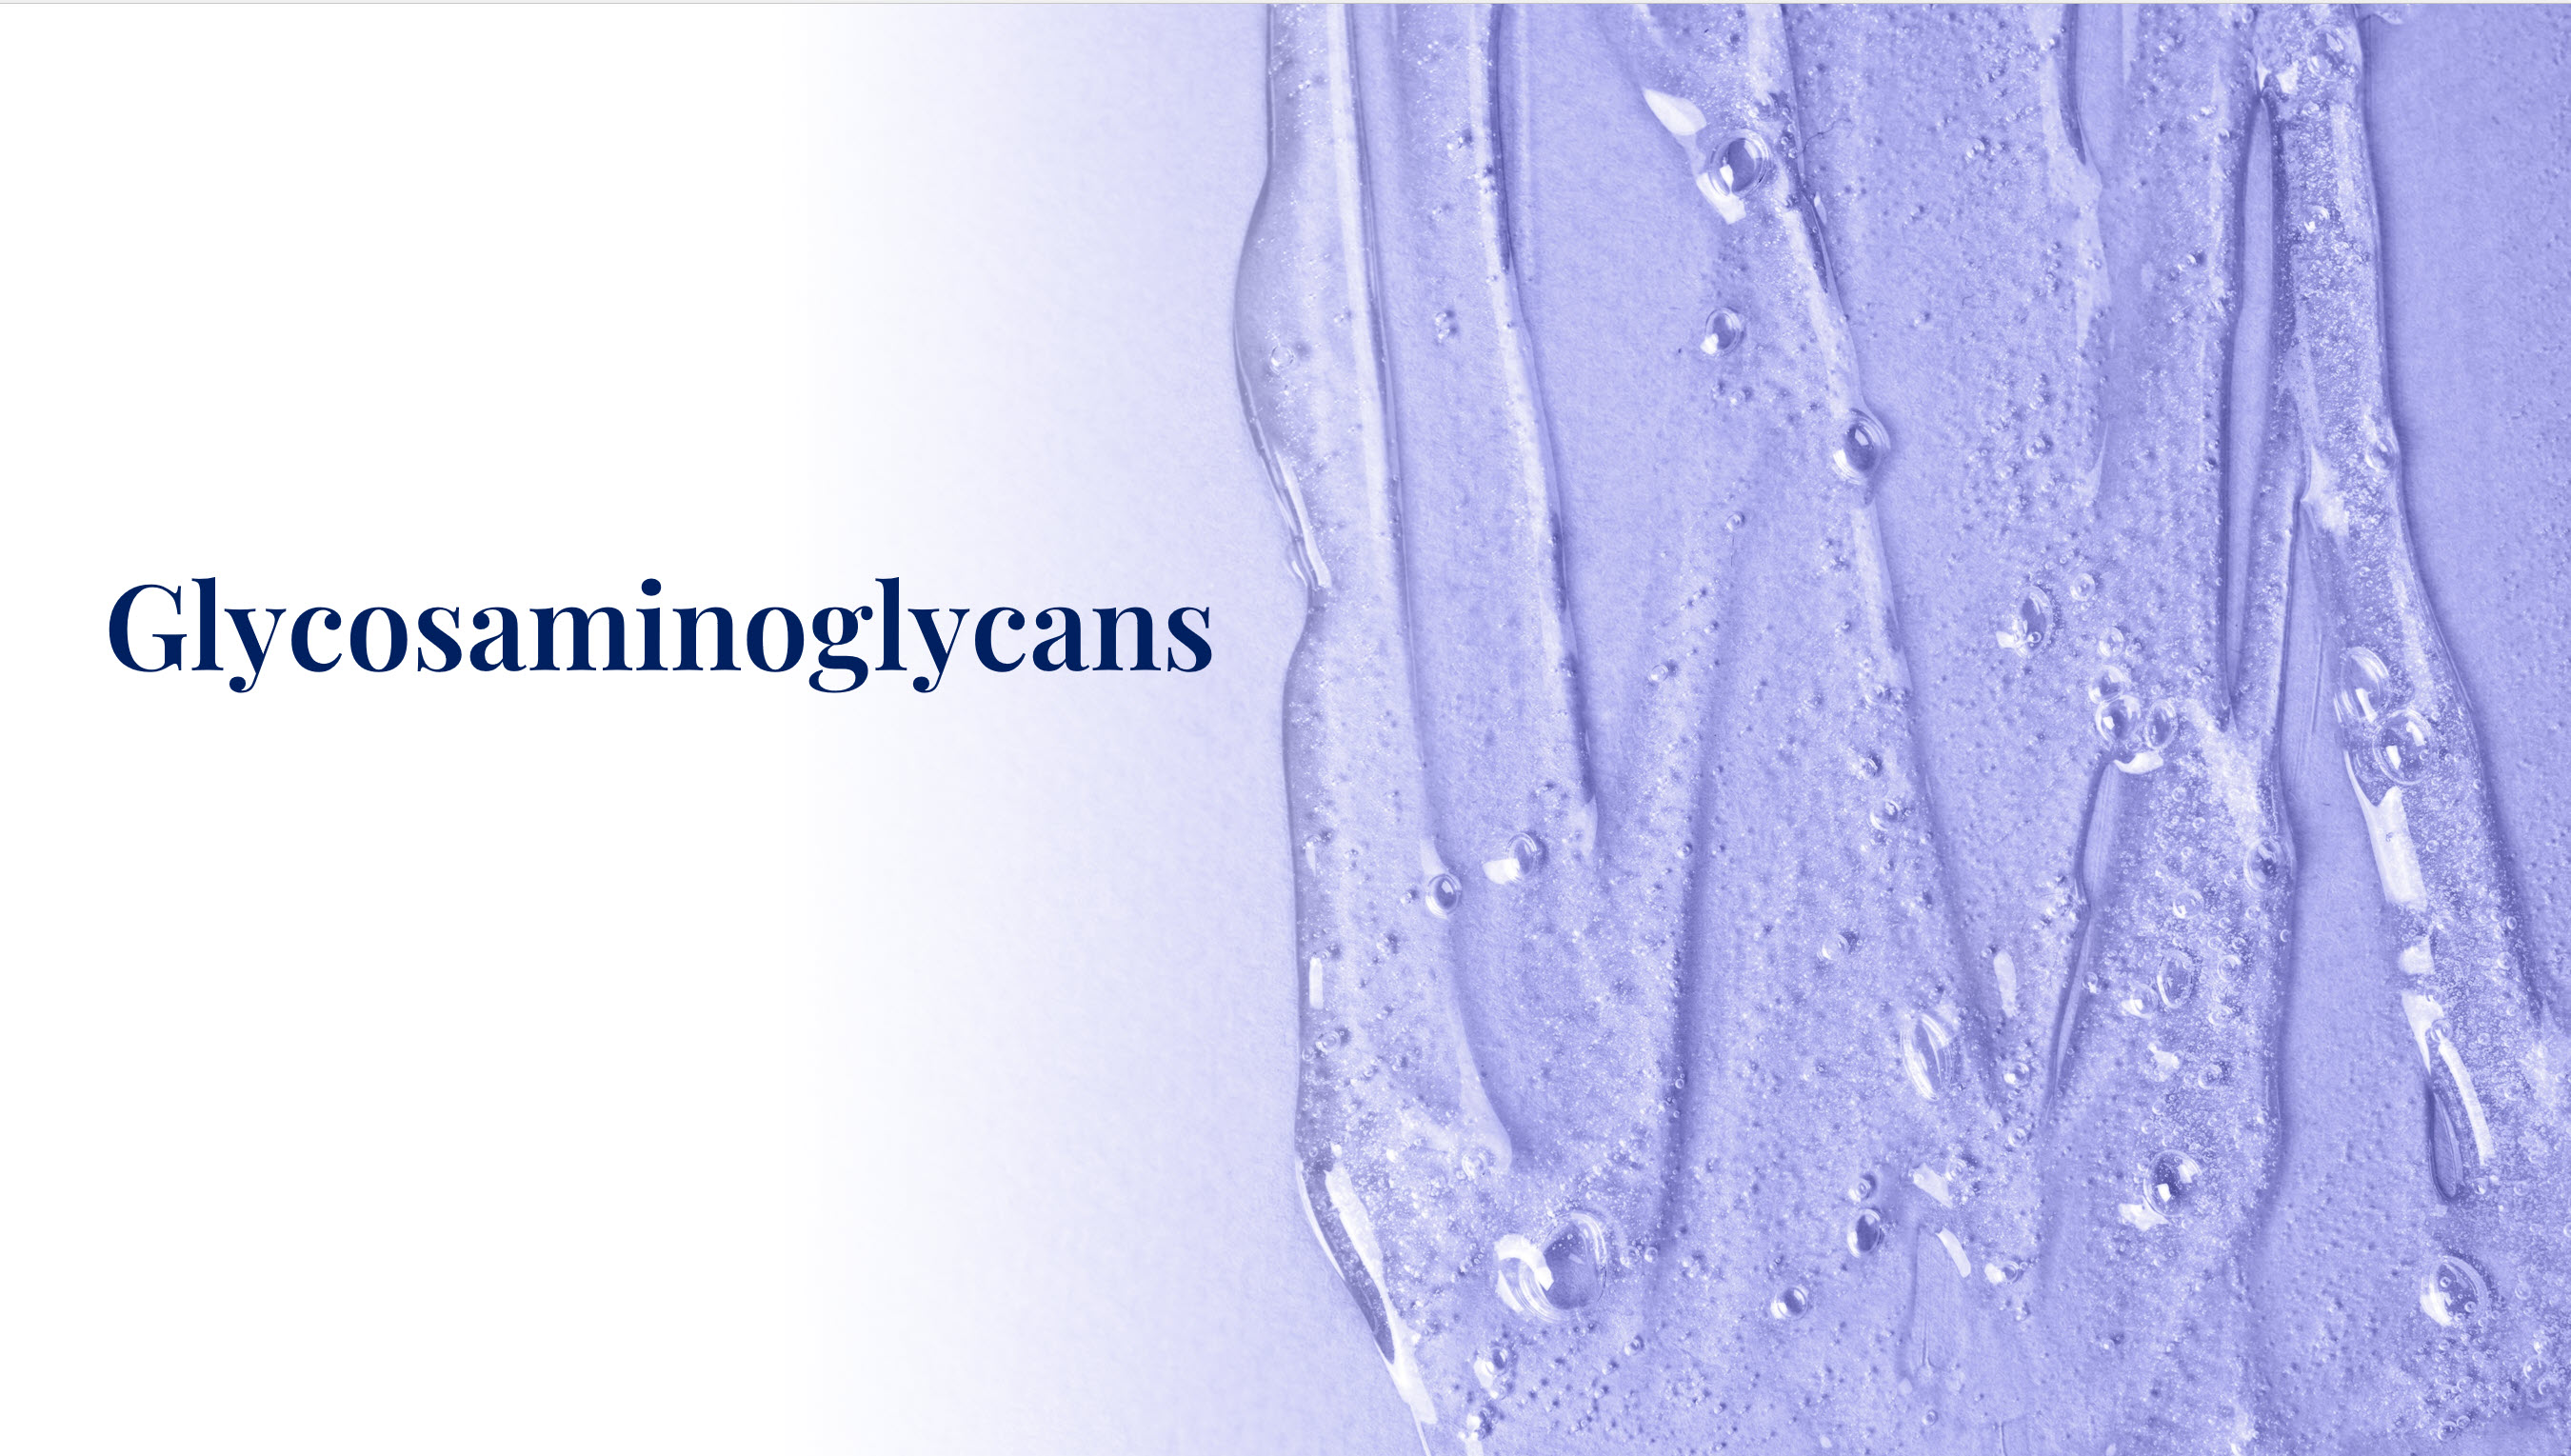 Glycosaminoglycans are gel like substances found in skin care.  Image shows a lavender gel